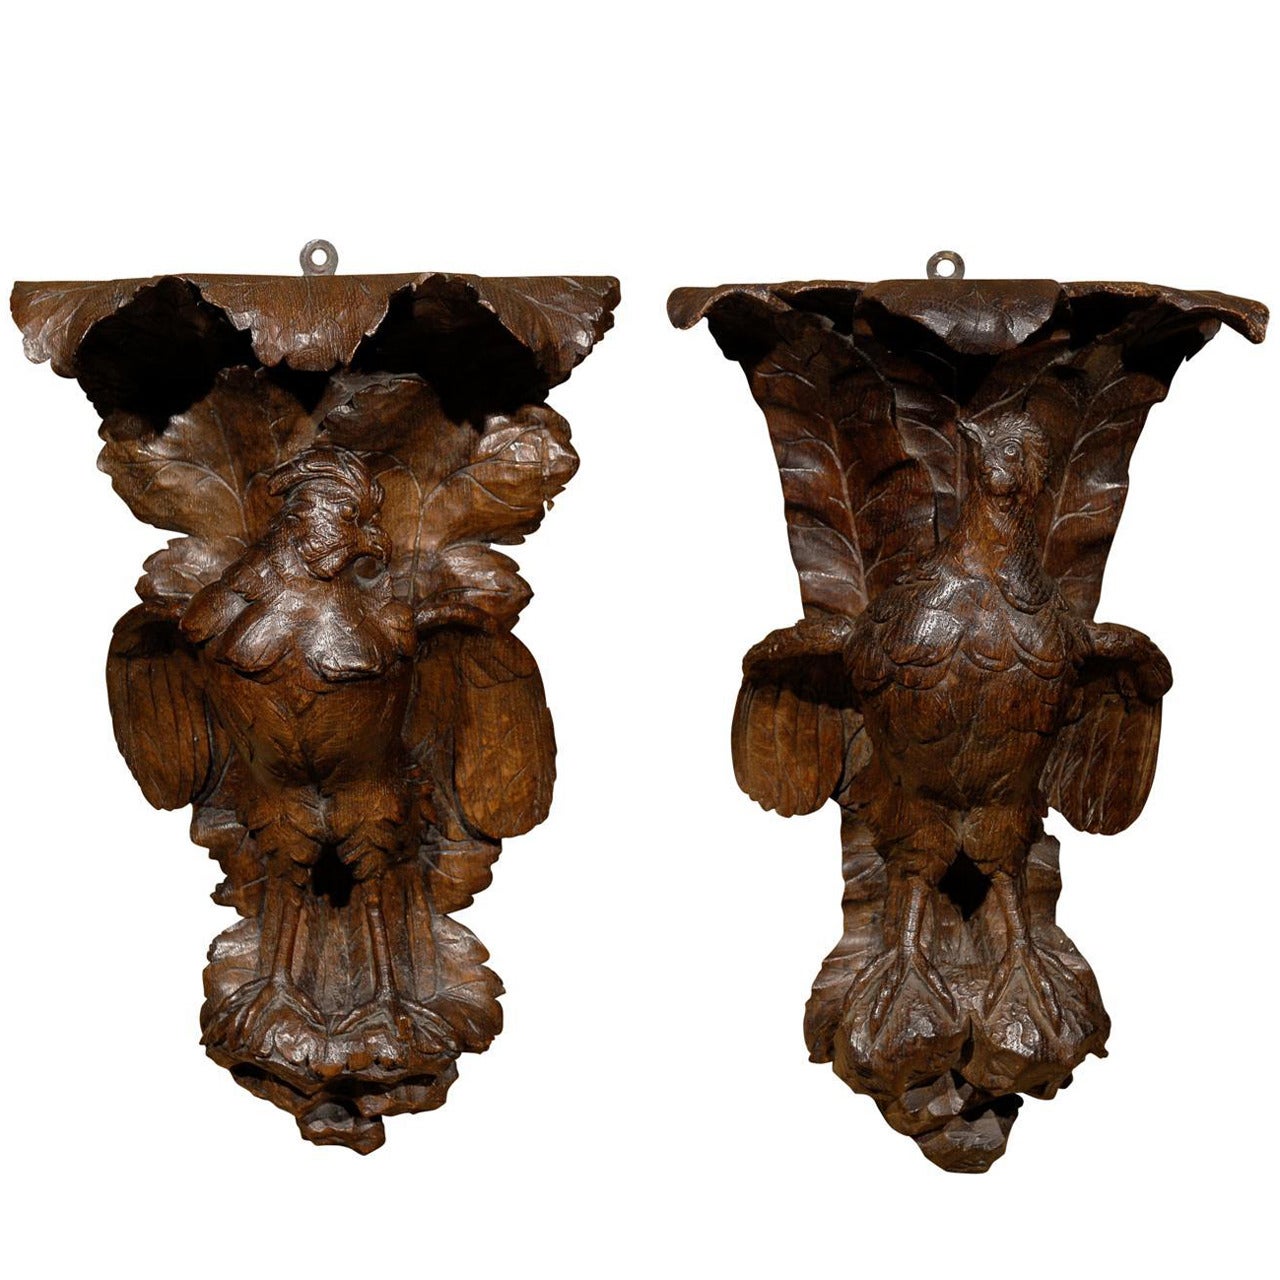 Pair of Black Forest Carved Wall Brackets or Shelves